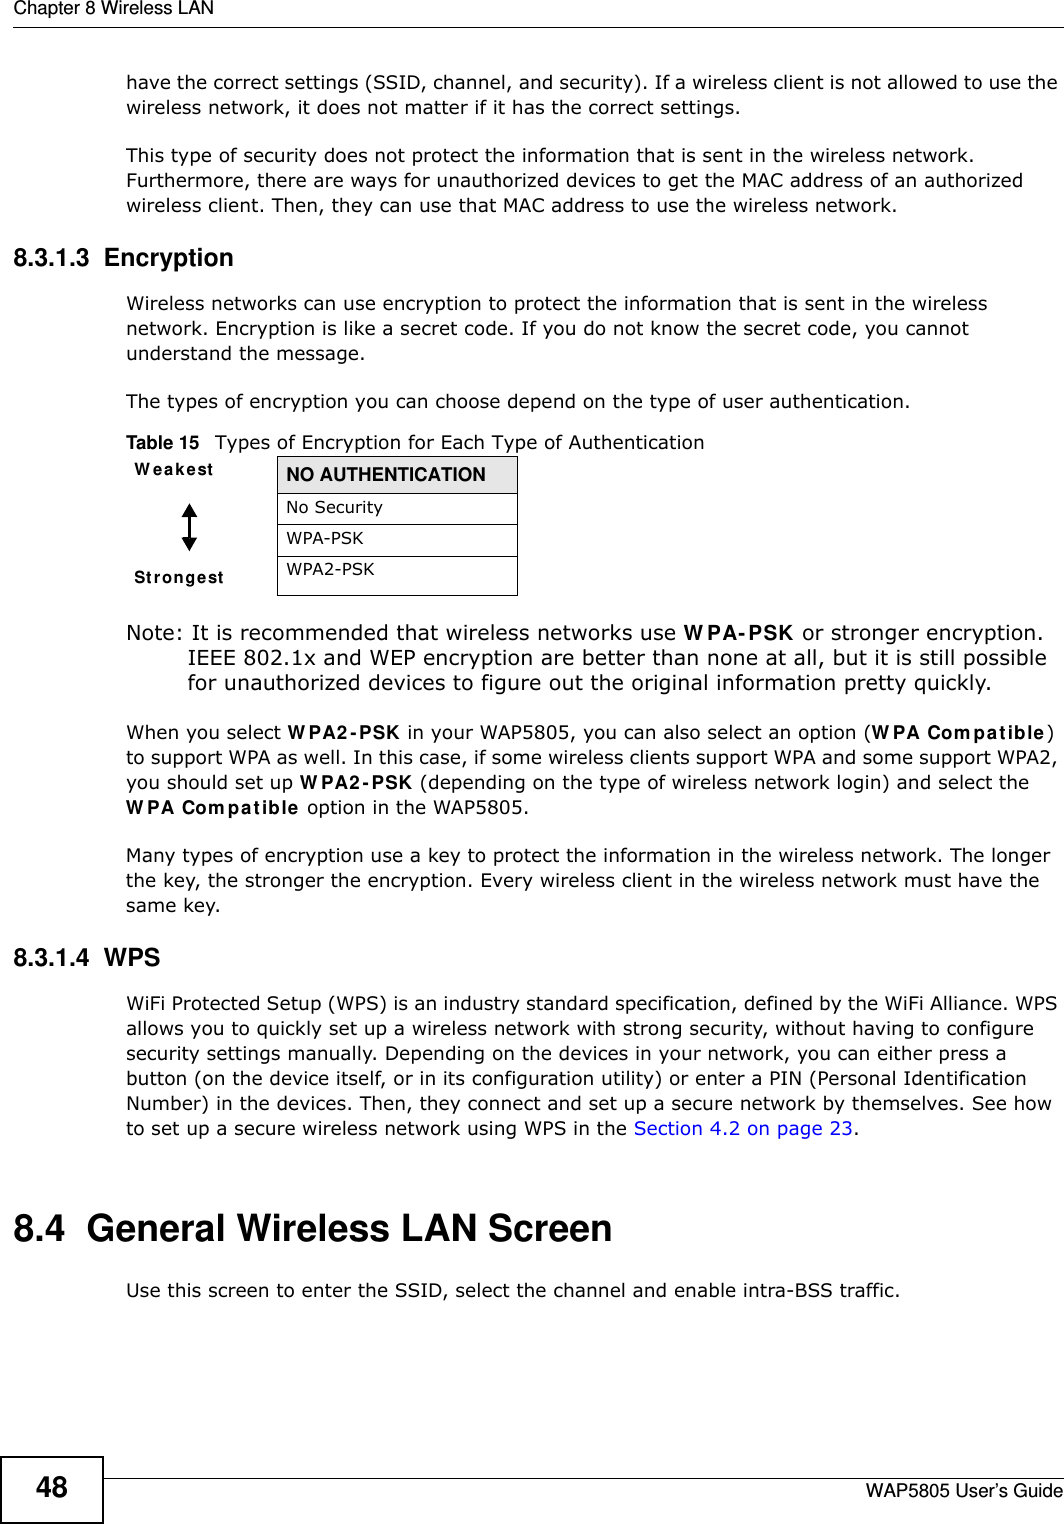 Chapter 8 Wireless LANWAP5805 User’s Guide48have the correct settings (SSID, channel, and security). If a wireless client is not allowed to use the wireless network, it does not matter if it has the correct settings.This type of security does not protect the information that is sent in the wireless network. Furthermore, there are ways for unauthorized devices to get the MAC address of an authorized wireless client. Then, they can use that MAC address to use the wireless network.8.3.1.3  EncryptionWireless networks can use encryption to protect the information that is sent in the wireless network. Encryption is like a secret code. If you do not know the secret code, you cannot understand the message.The types of encryption you can choose depend on the type of user authentication. Note: It is recommended that wireless networks use WPA-PSK or stronger encryption. IEEE 802.1x and WEP encryption are better than none at all, but it is still possible for unauthorized devices to figure out the original information pretty quickly.When you select WPA2-PSK in your WAP5805, you can also select an option (WPA Compatible) to support WPA as well. In this case, if some wireless clients support WPA and some support WPA2, you should set up WPA2-PSK (depending on the type of wireless network login) and select the WPA Compatible option in the WAP5805.Many types of encryption use a key to protect the information in the wireless network. The longer the key, the stronger the encryption. Every wireless client in the wireless network must have the same key.8.3.1.4  WPSWiFi Protected Setup (WPS) is an industry standard specification, defined by the WiFi Alliance. WPS allows you to quickly set up a wireless network with strong security, without having to configure security settings manually. Depending on the devices in your network, you can either press a button (on the device itself, or in its configuration utility) or enter a PIN (Personal Identification Number) in the devices. Then, they connect and set up a secure network by themselves. See how to set up a secure wireless network using WPS in the Section 4.2 on page 23. 8.4  General Wireless LAN Screen       Use this screen to enter the SSID, select the channel and enable intra-BSS traffic.Table 15   Types of Encryption for Each Type of AuthenticationWeakest NO AUTHENTICATIONStrongestNo SecurityWPA-PSKWPA2-PSK